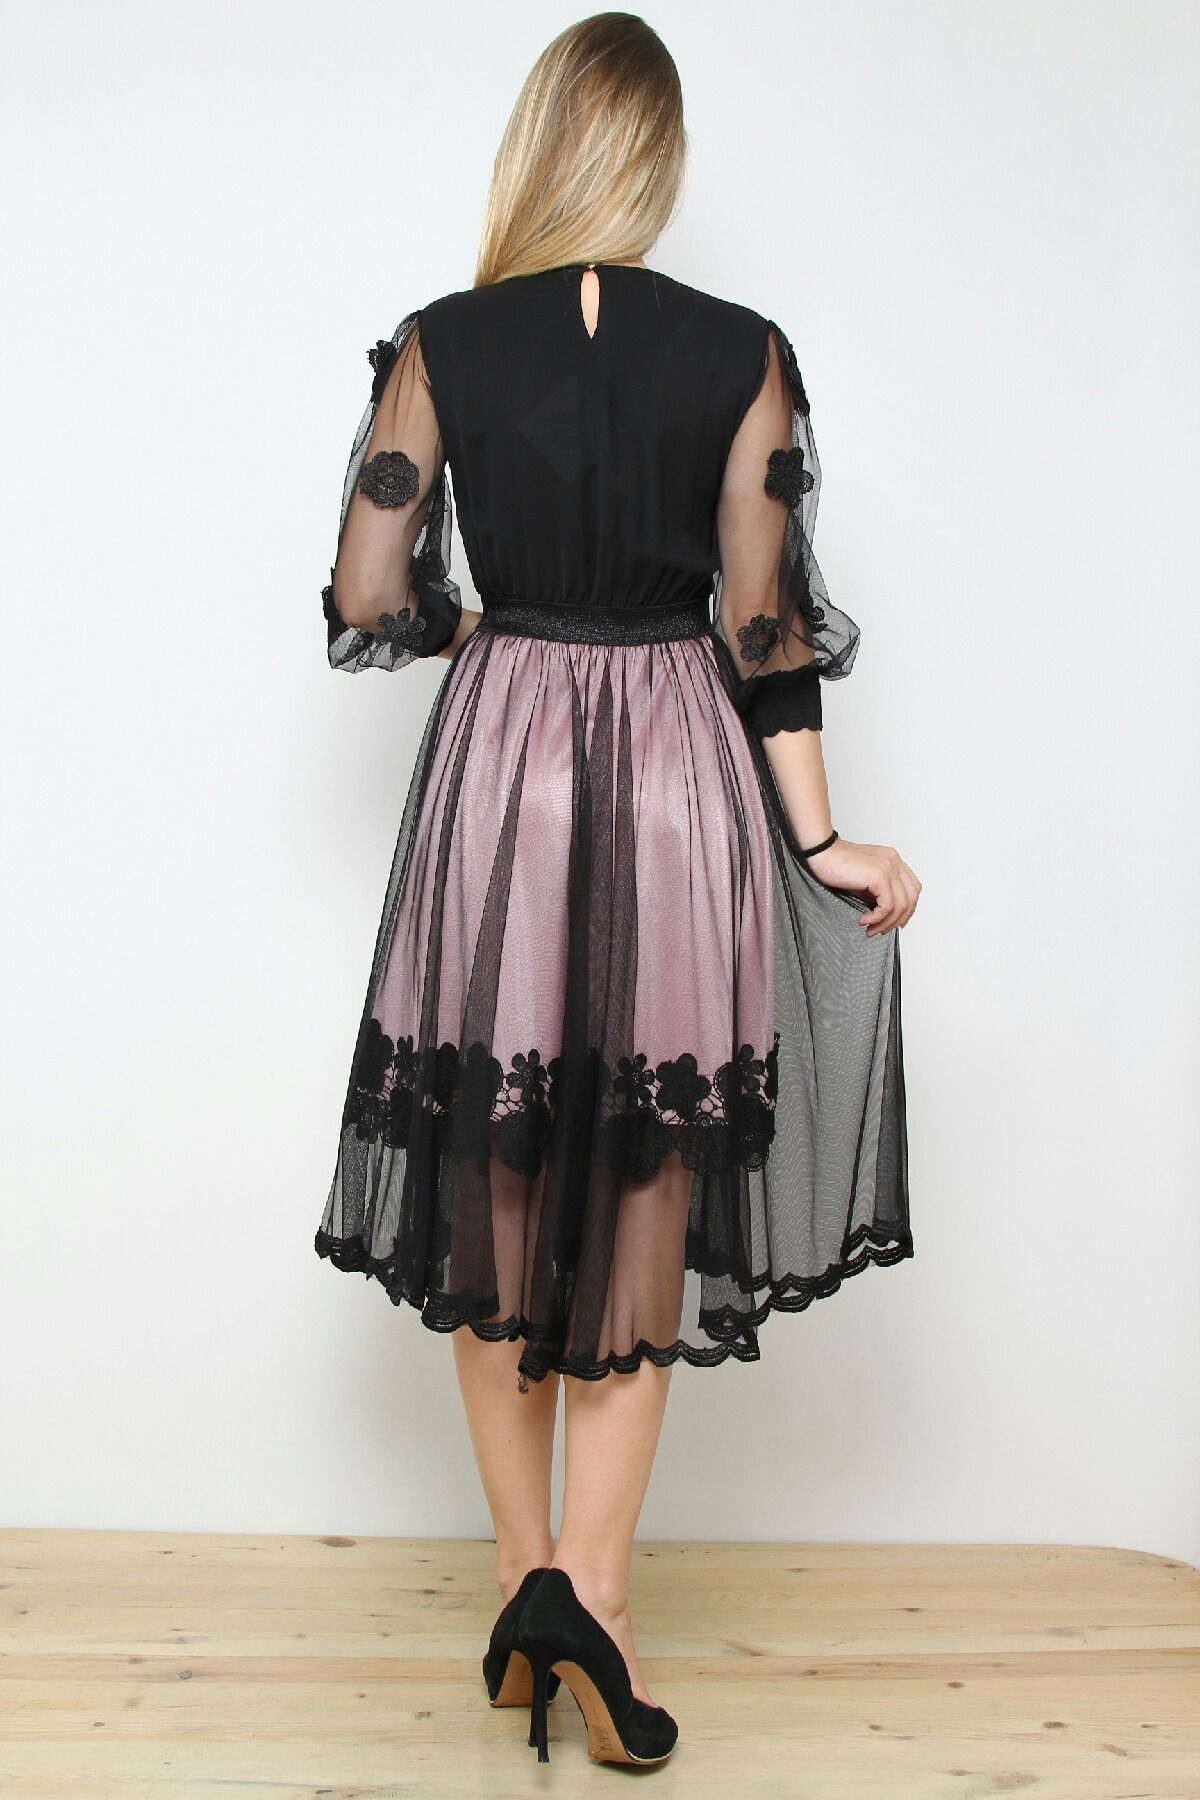 Evening dress with the sparkling top and chiffon skirt